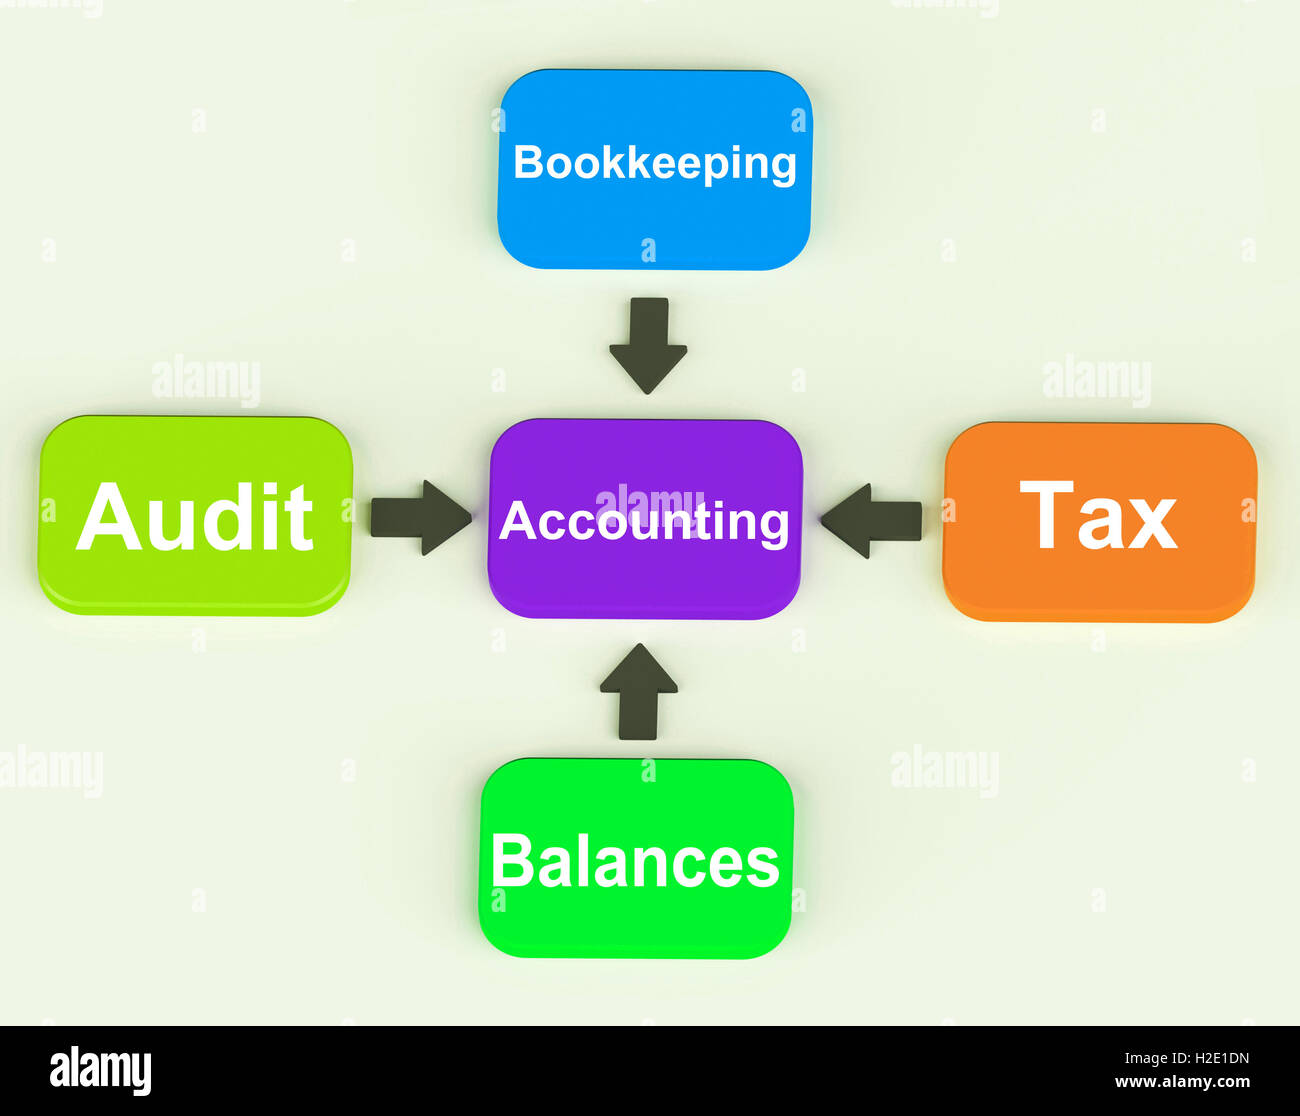 Accounting Diagram Shows Accountant Balances And Bookkeeping Stock Photo